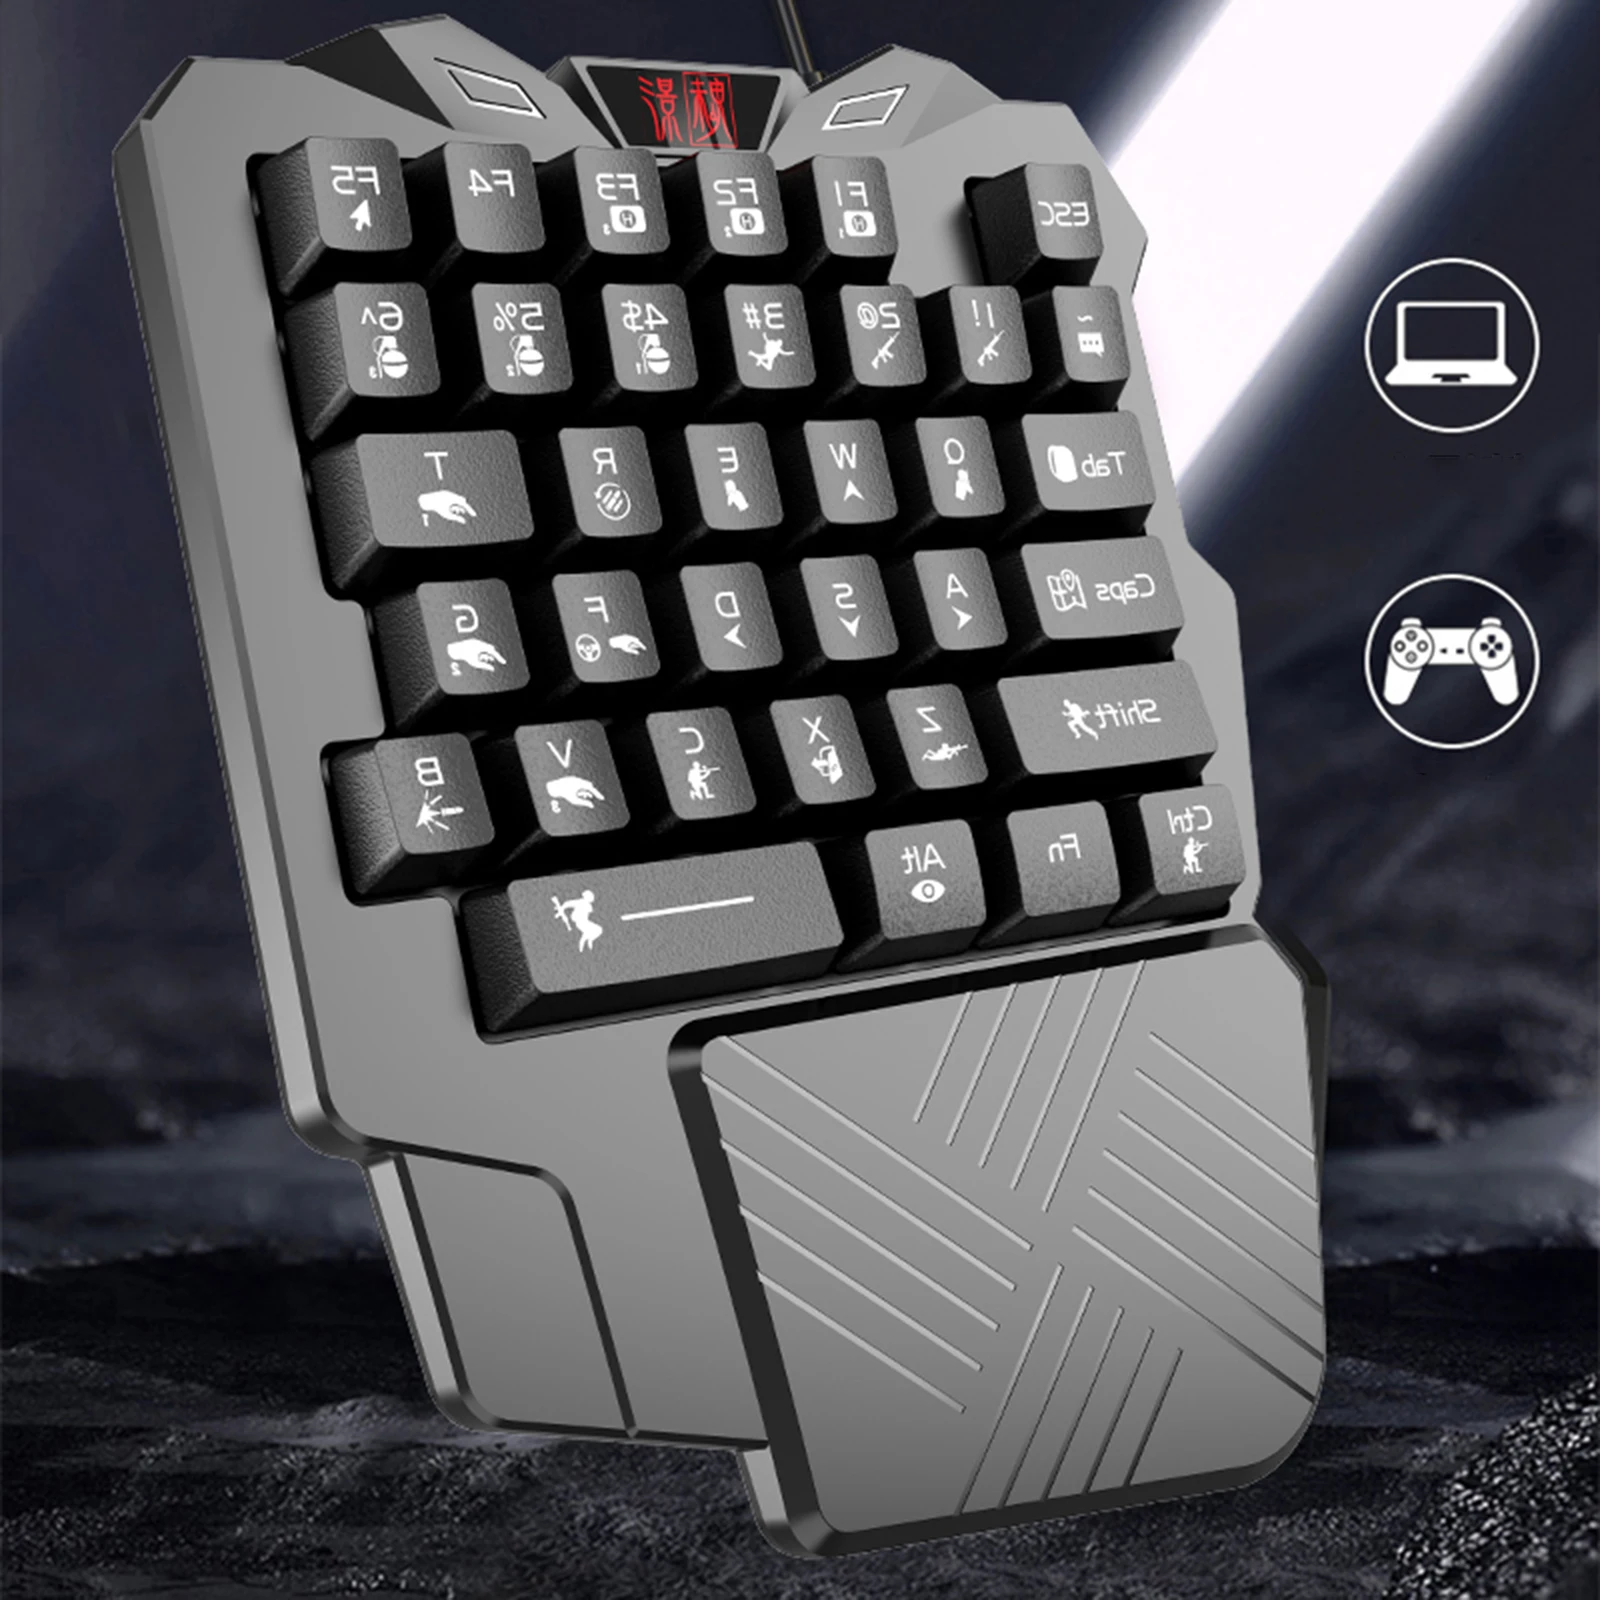 Mini Single Hand Professional Gaming Keyboard 35 Keys USB Wired for PC Games